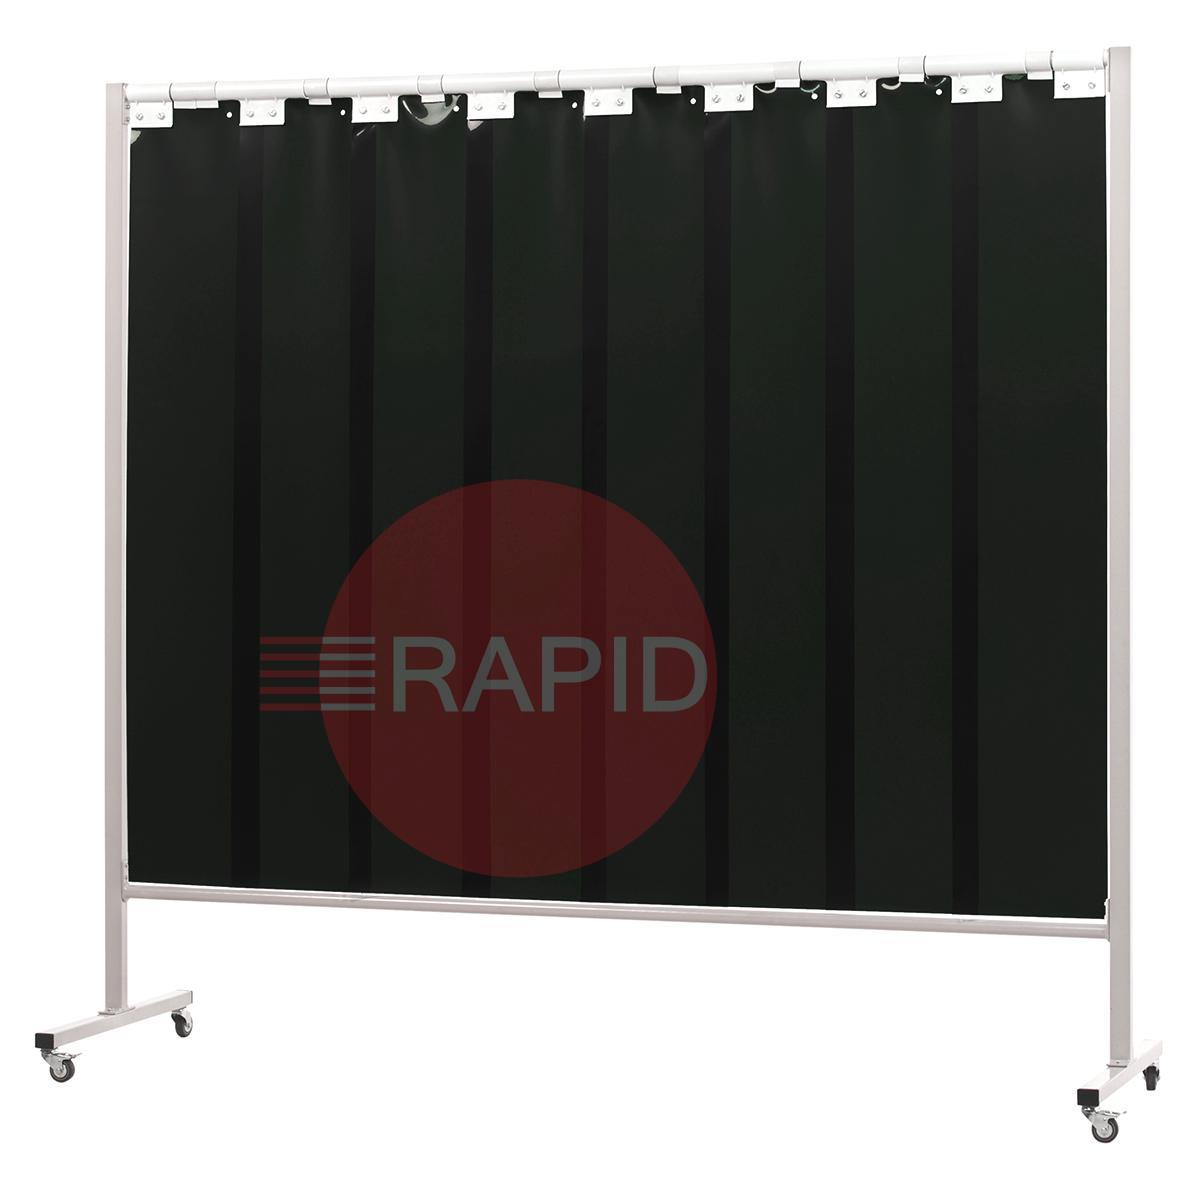 36.34.26  CEPRO Omnium Single Welding Screen, with Green-6 Strips - 2.2m Wide x 2m High, Approved EN 25980